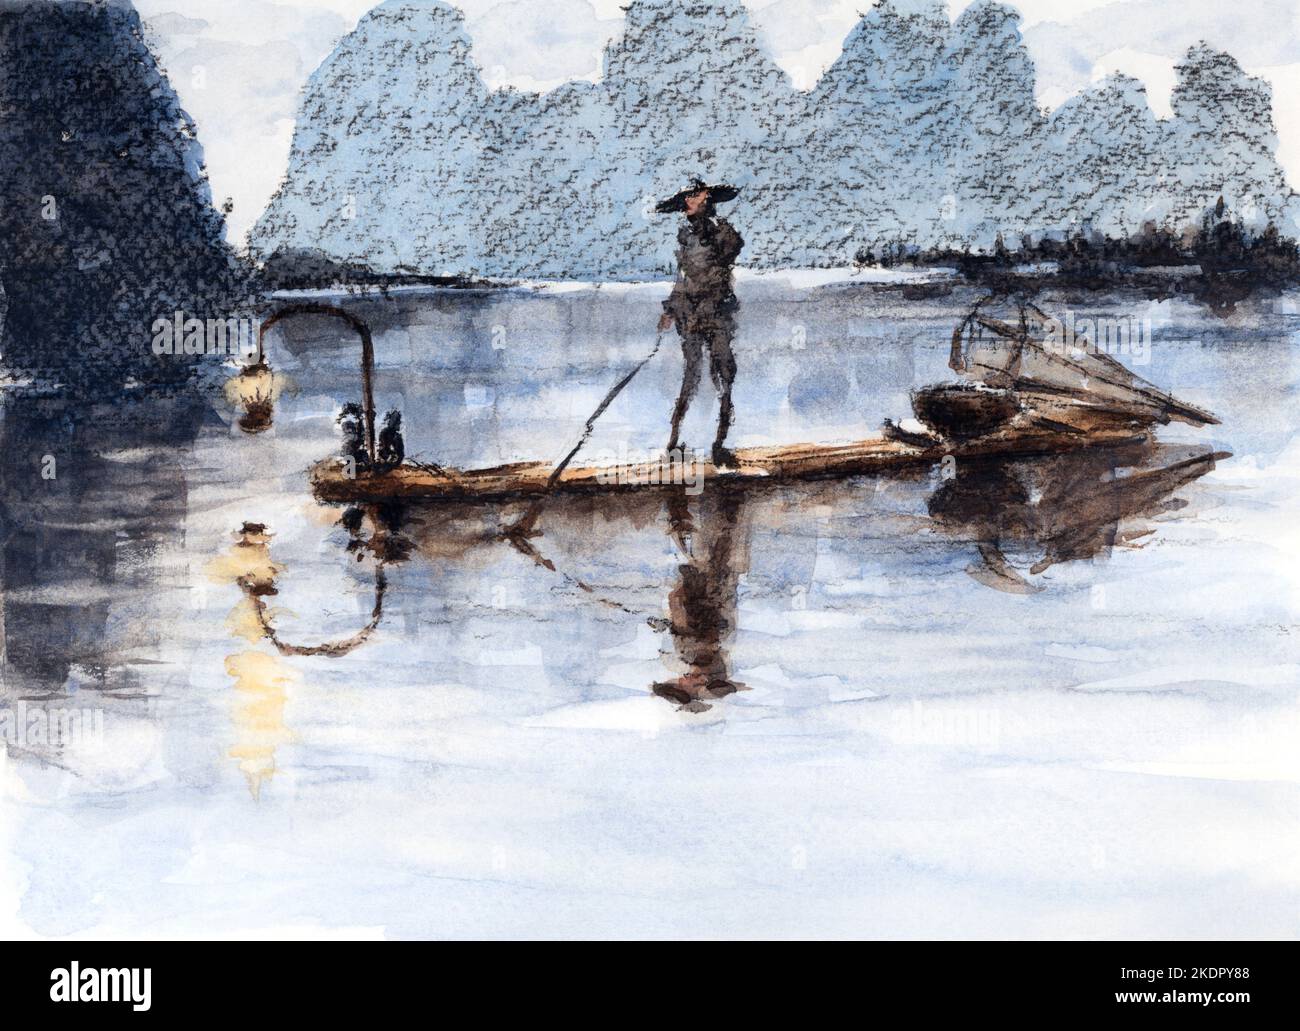 Traditional fishing on Li river. Charcoal and watercolor on paper. Stock Photo